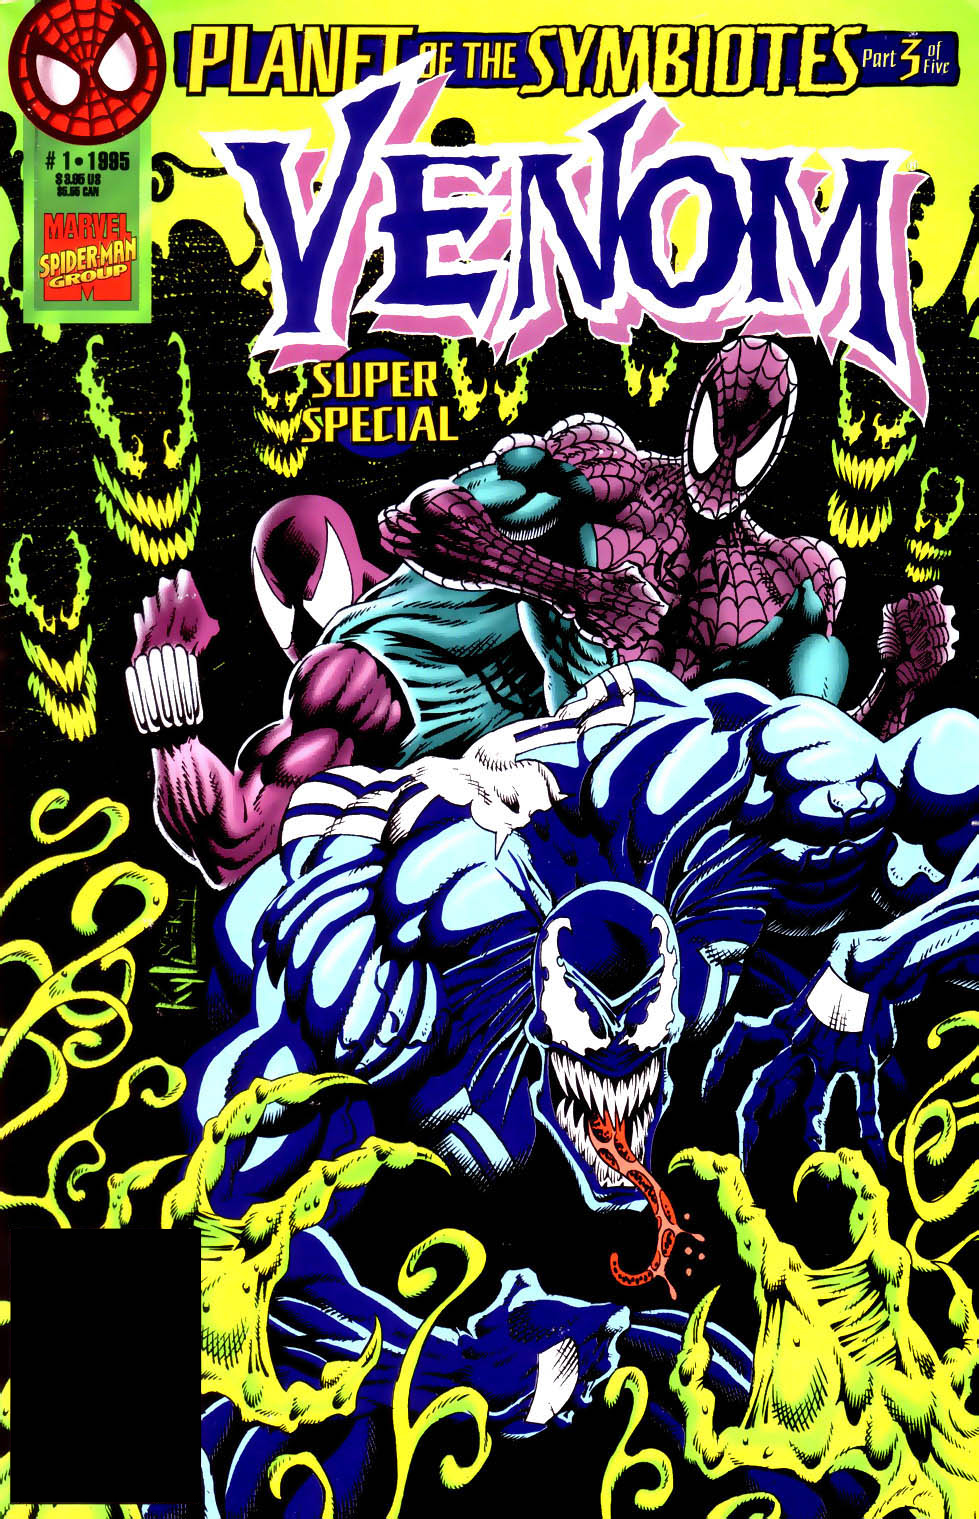 The Marvel Comics Guide: PLANET OF THE SYMBIOTES (1995)